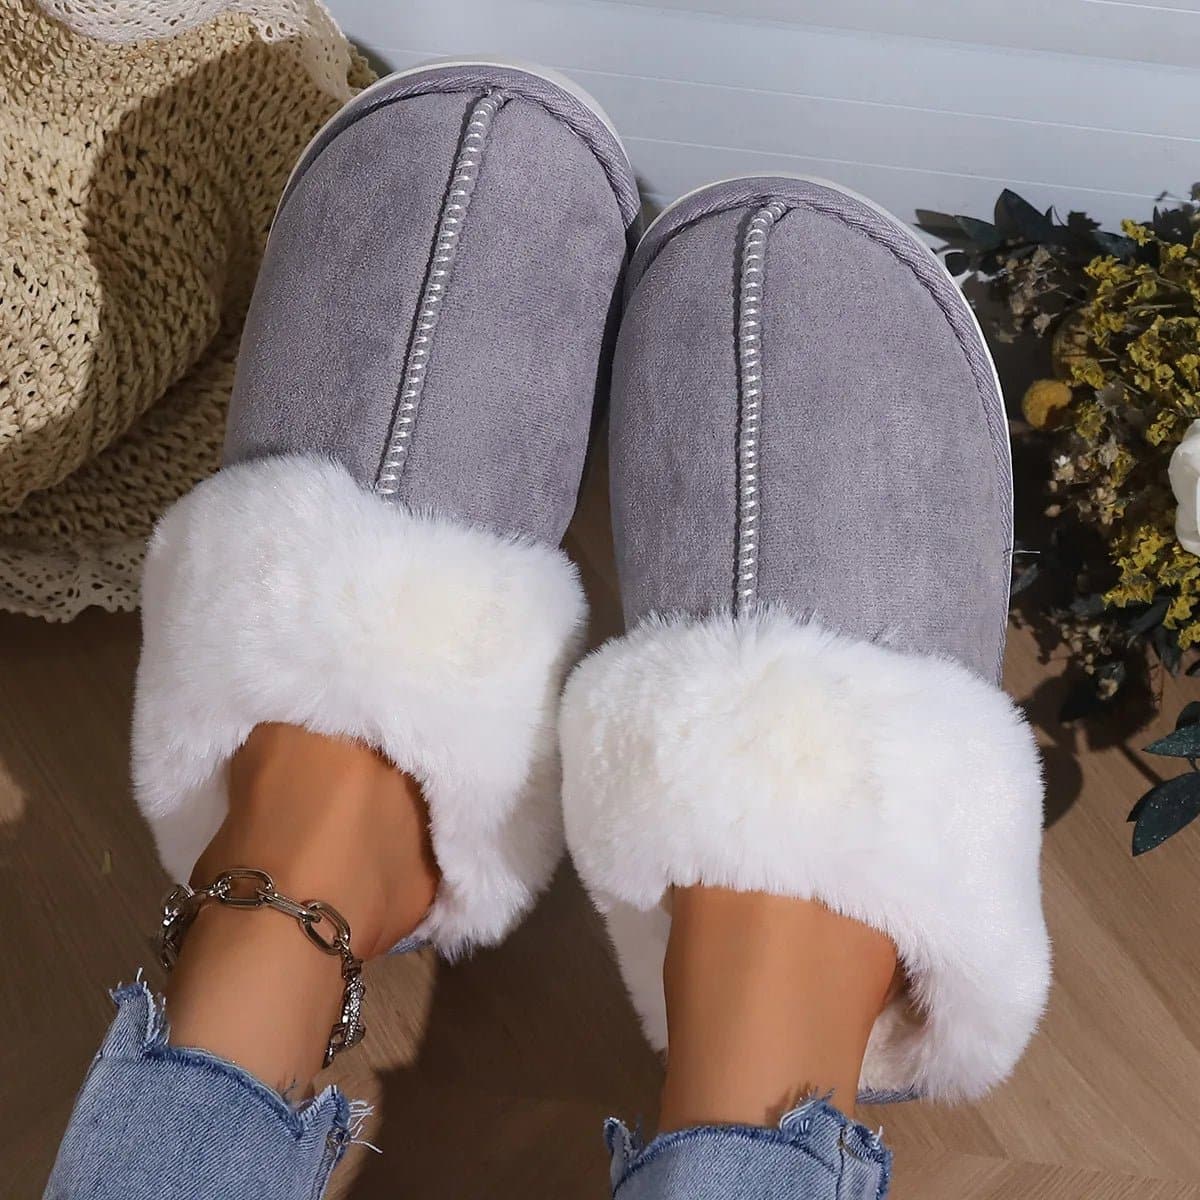 Soft Sole Plush Cotton Slippers - Warm, Cozy, and Stylish for Indoor Comfort - Wandering Woman